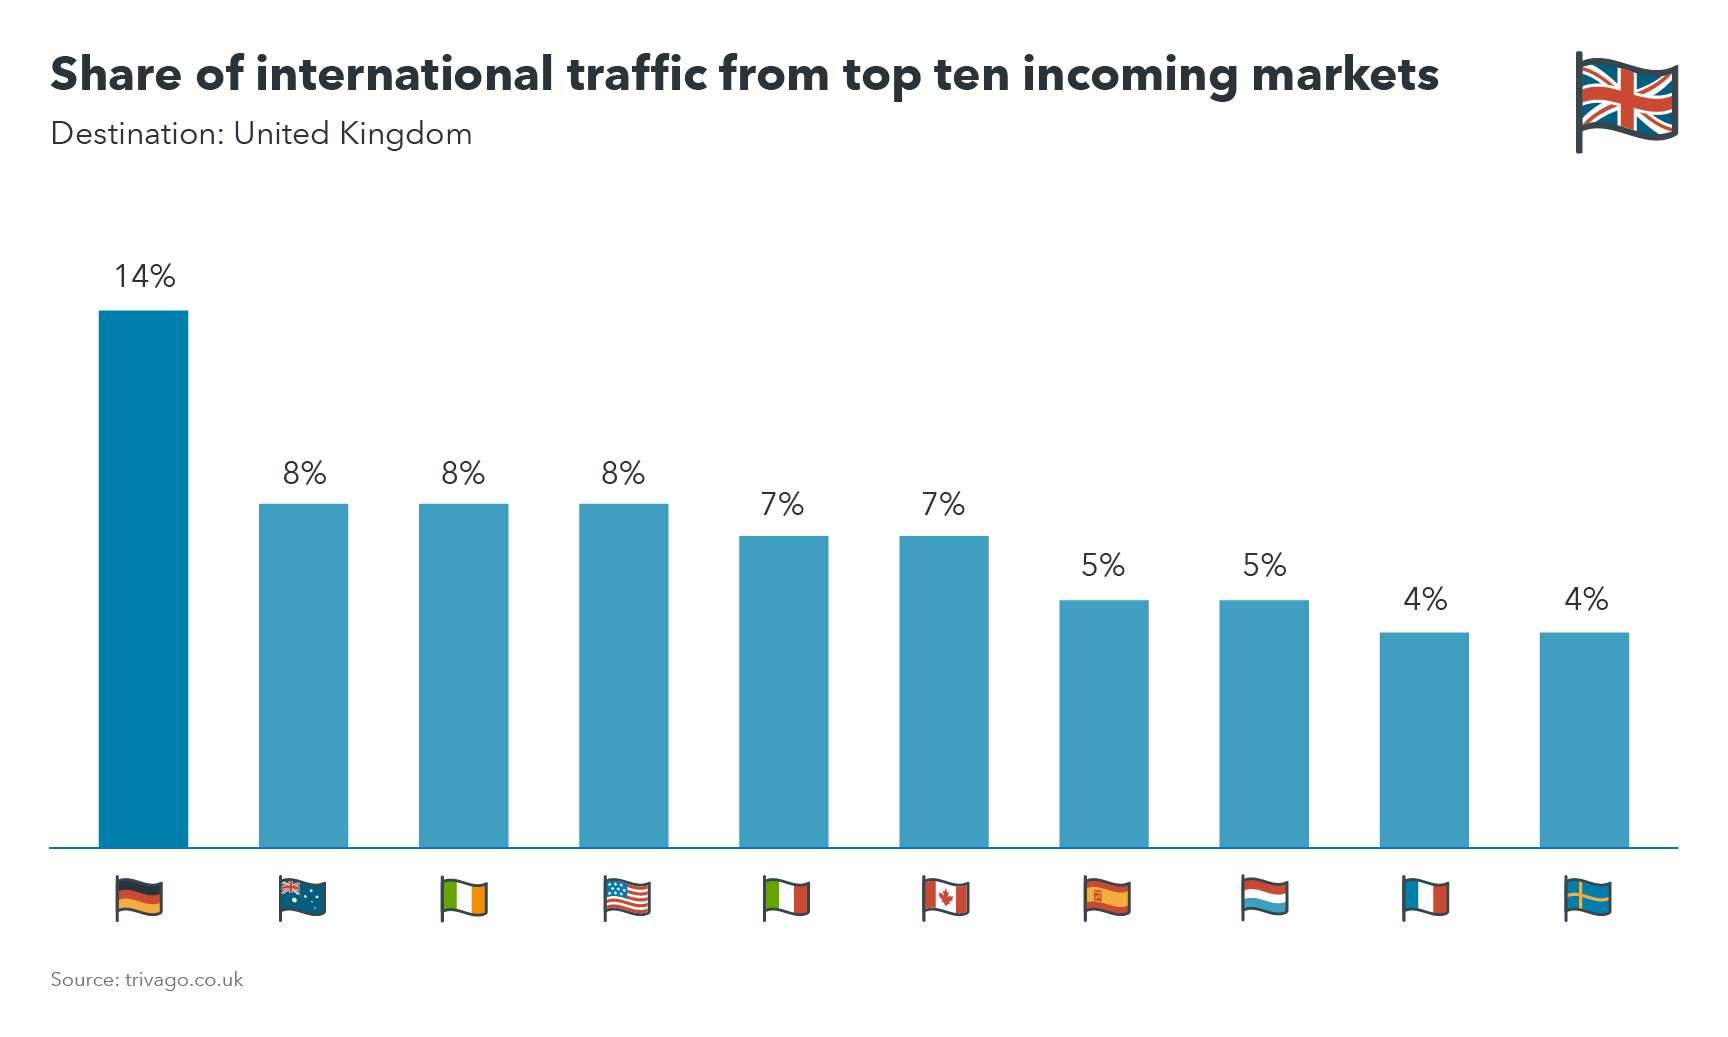 Chart showing share of international traffic from top ten incoming markets to UK destinations